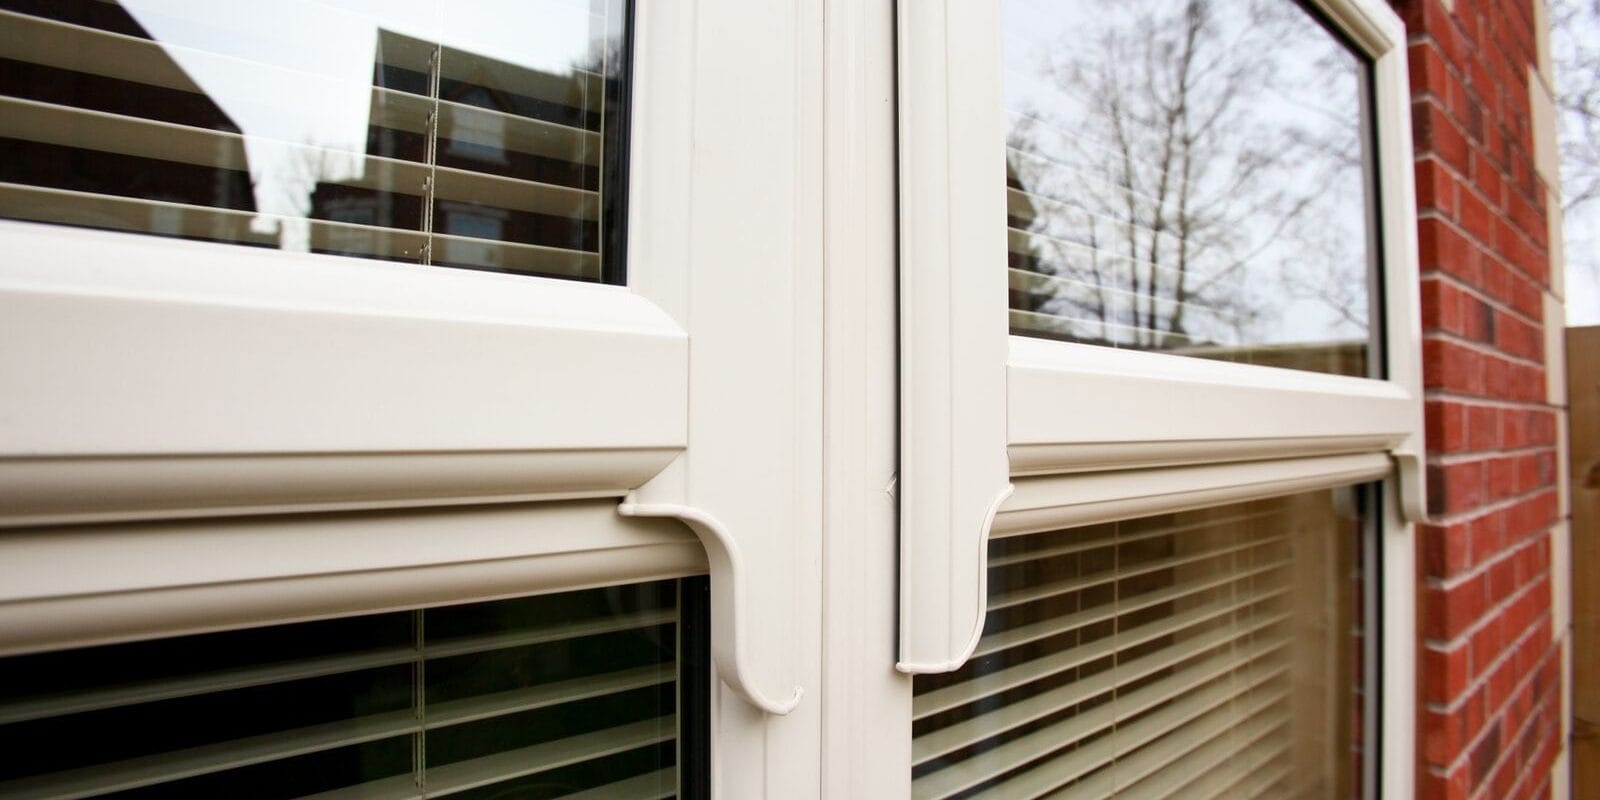 How to clean double glazed windows